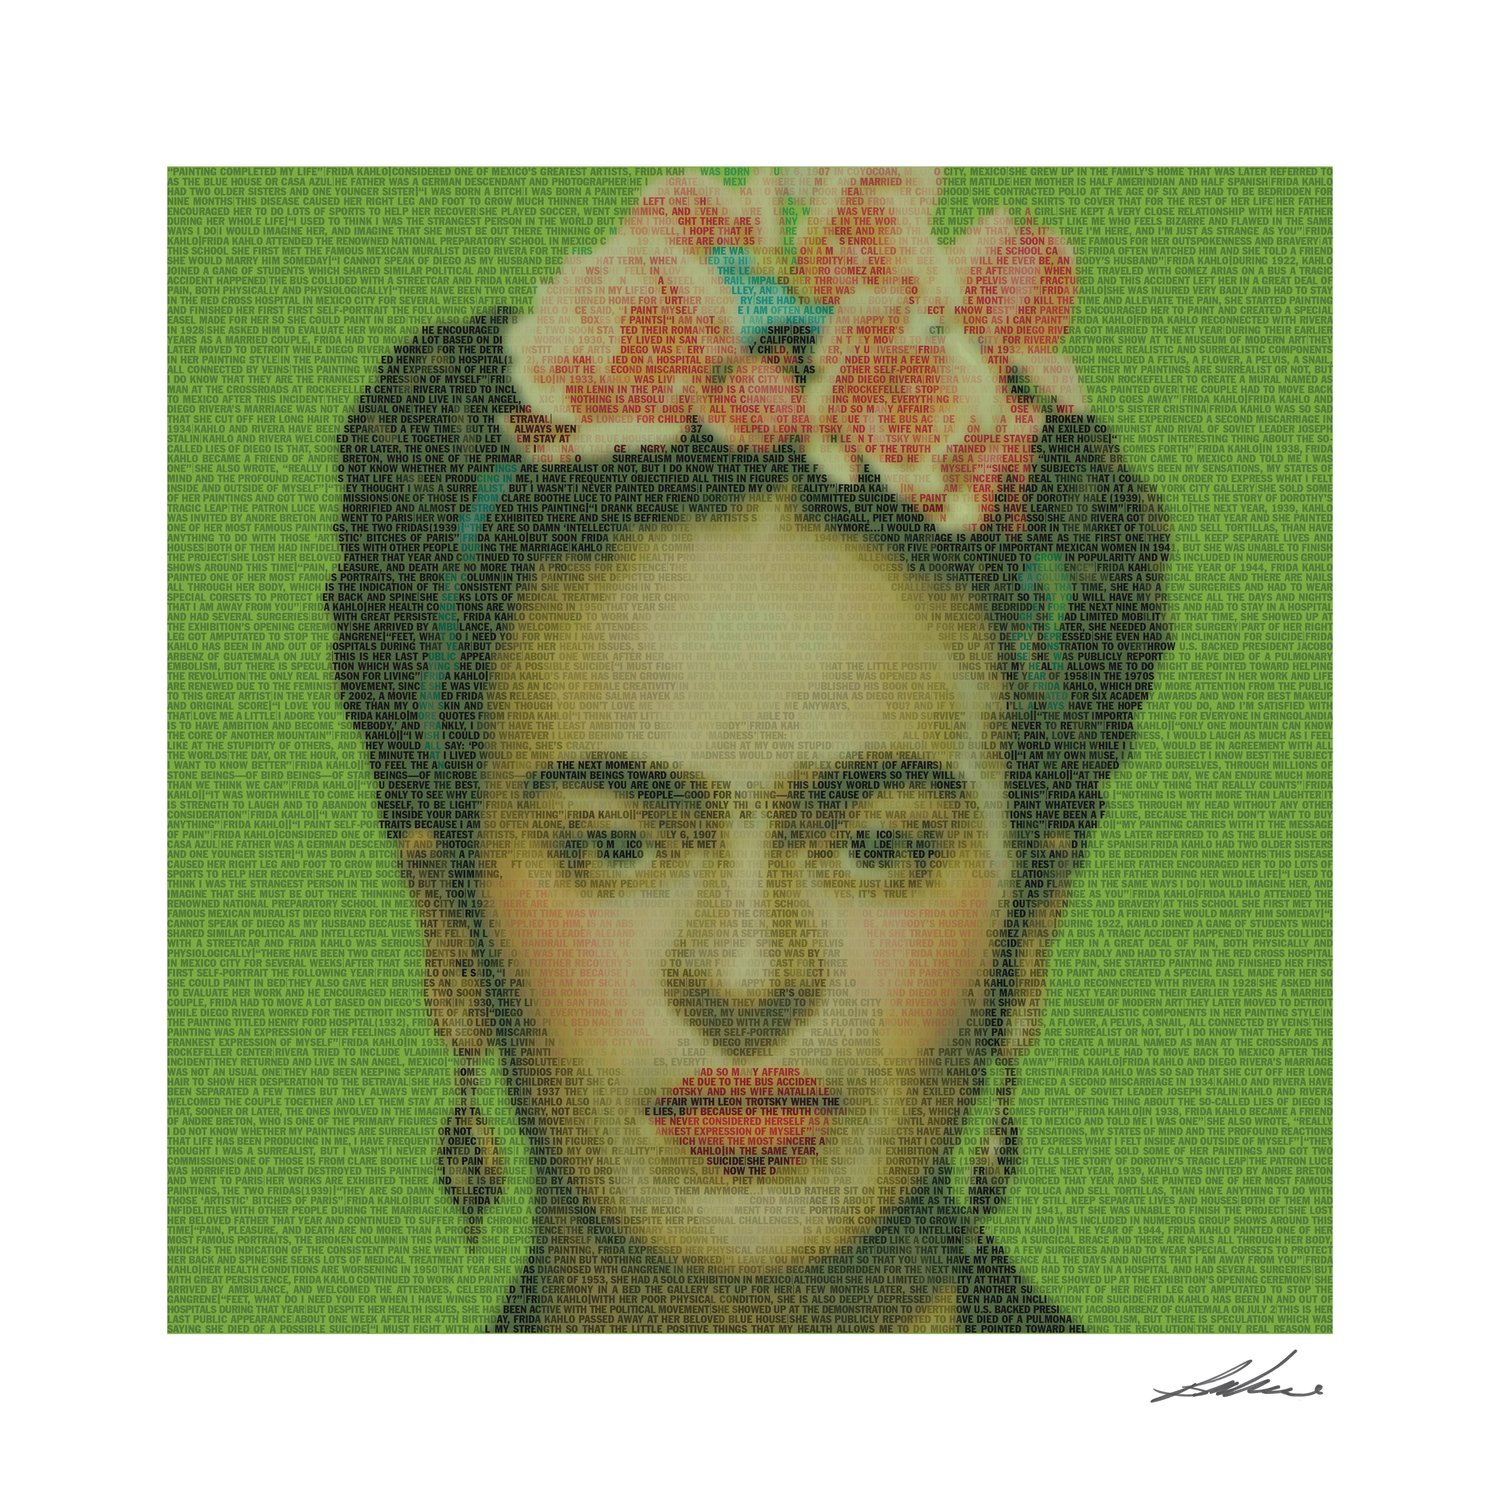 A portrait of Frida Kahlo is part of the works by Bryce Culverhouse.